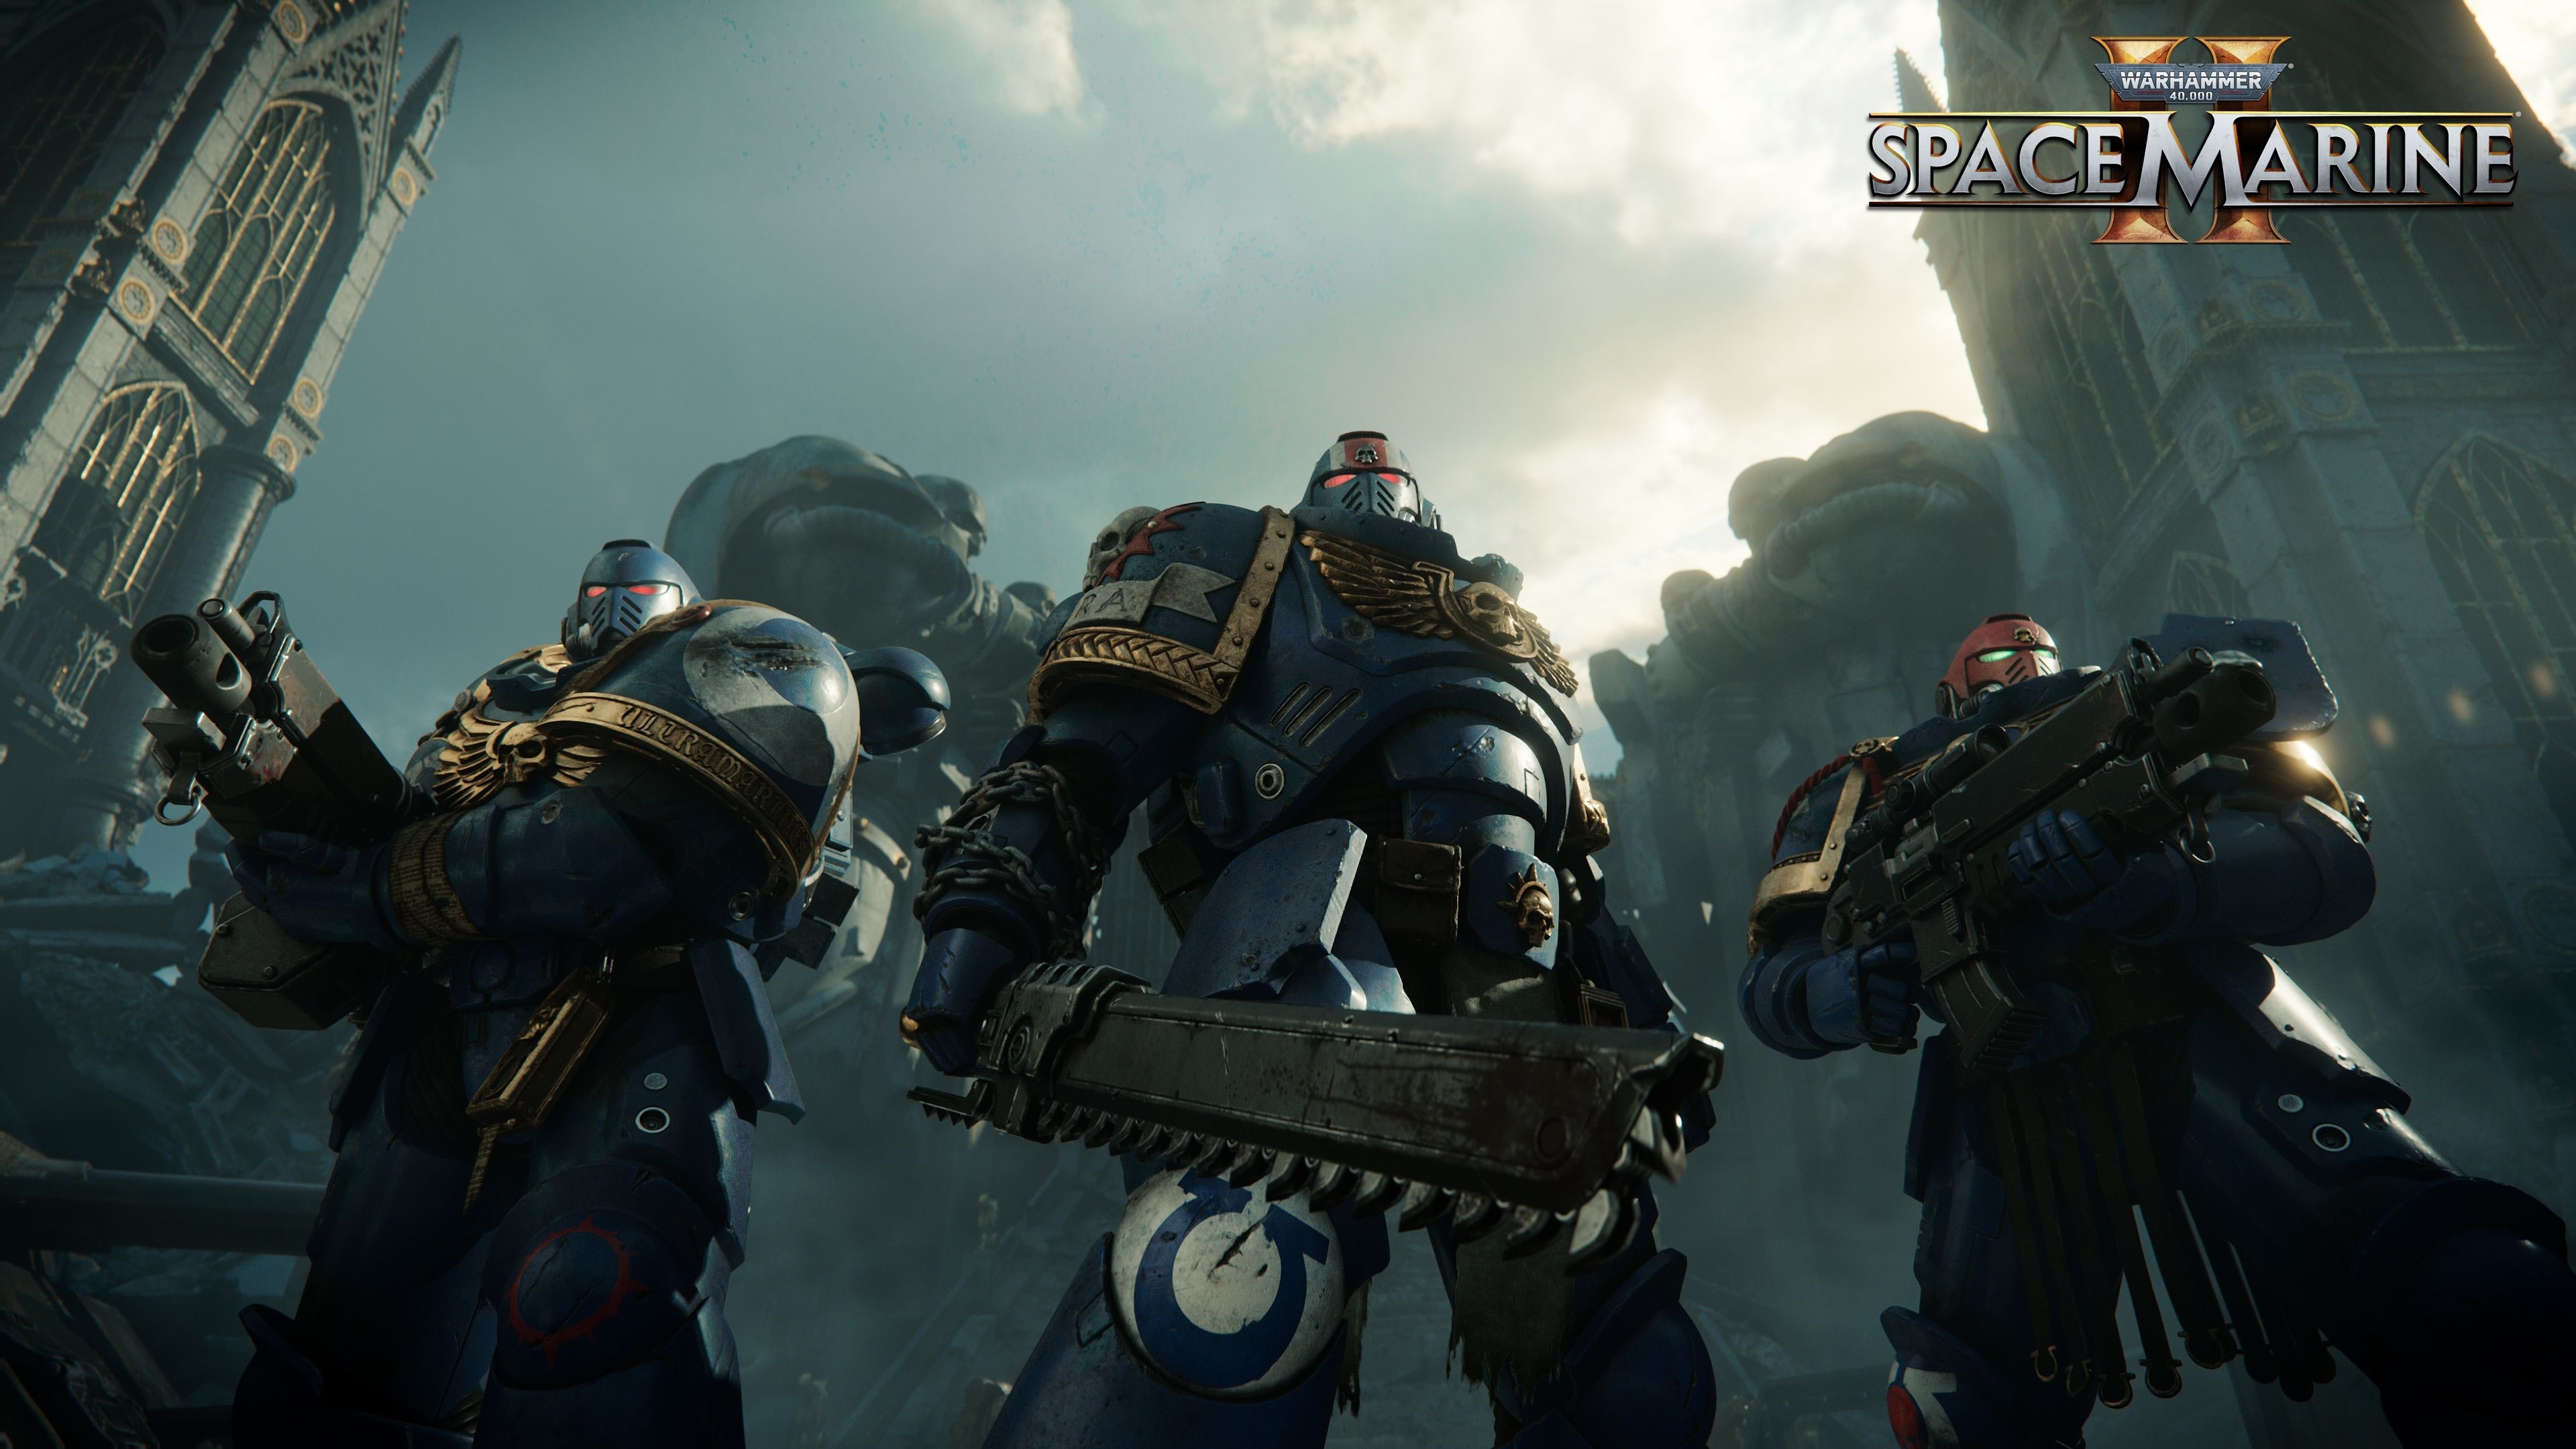 HD wallpaper, Warhammer 40K Space Marine 2, Xbox Series X And Series S, 2022 Games, Pc Games, Playstation 5